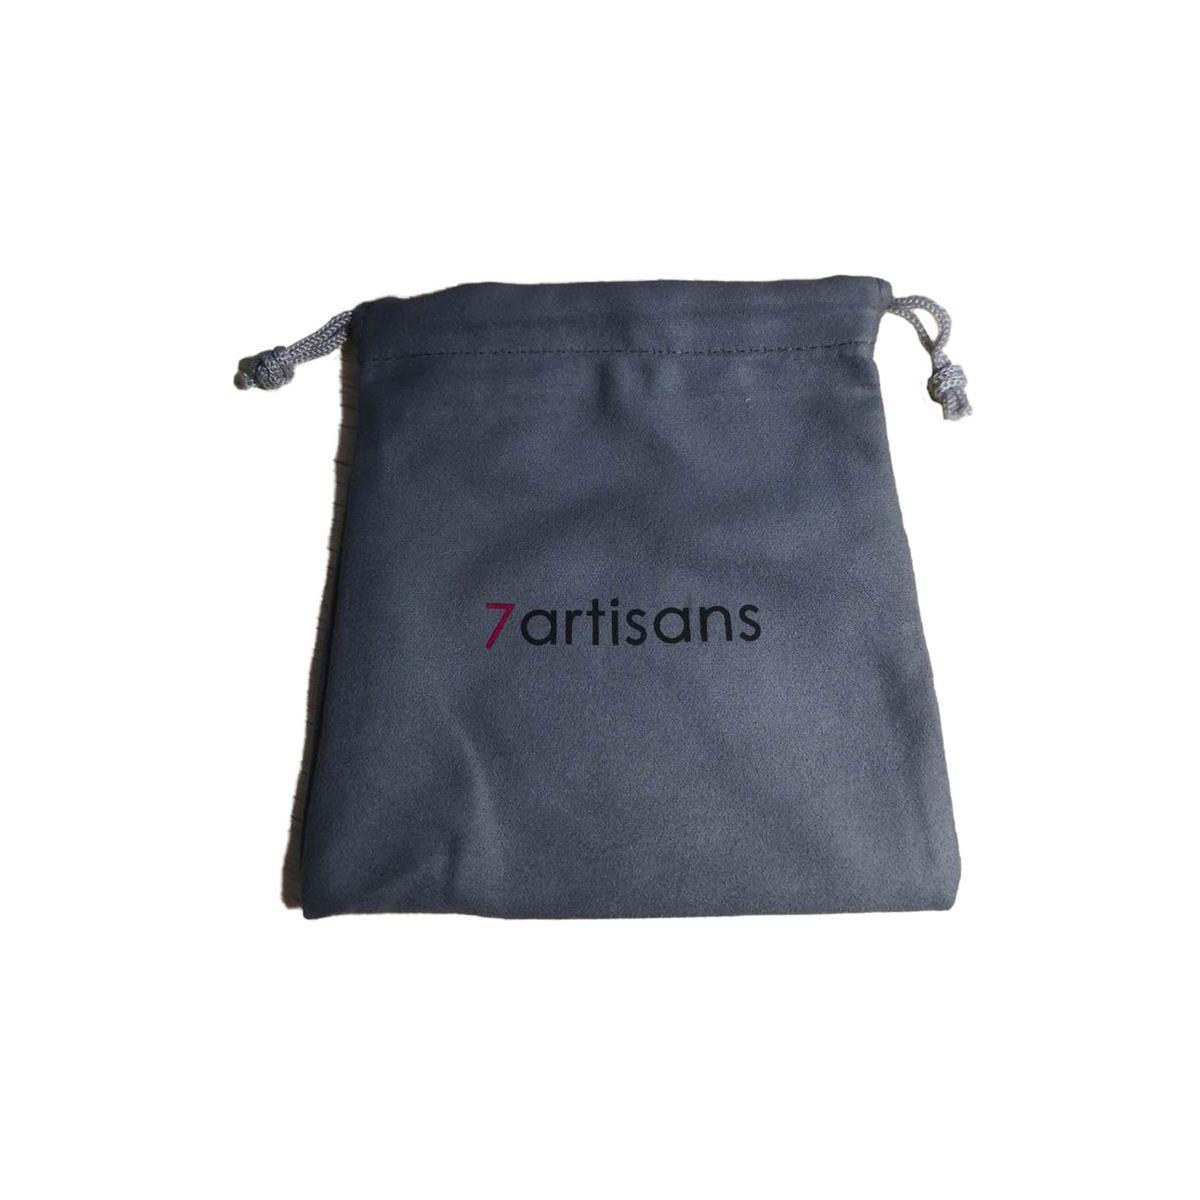 Image of 7artisans Photoelectric Lens Pouch